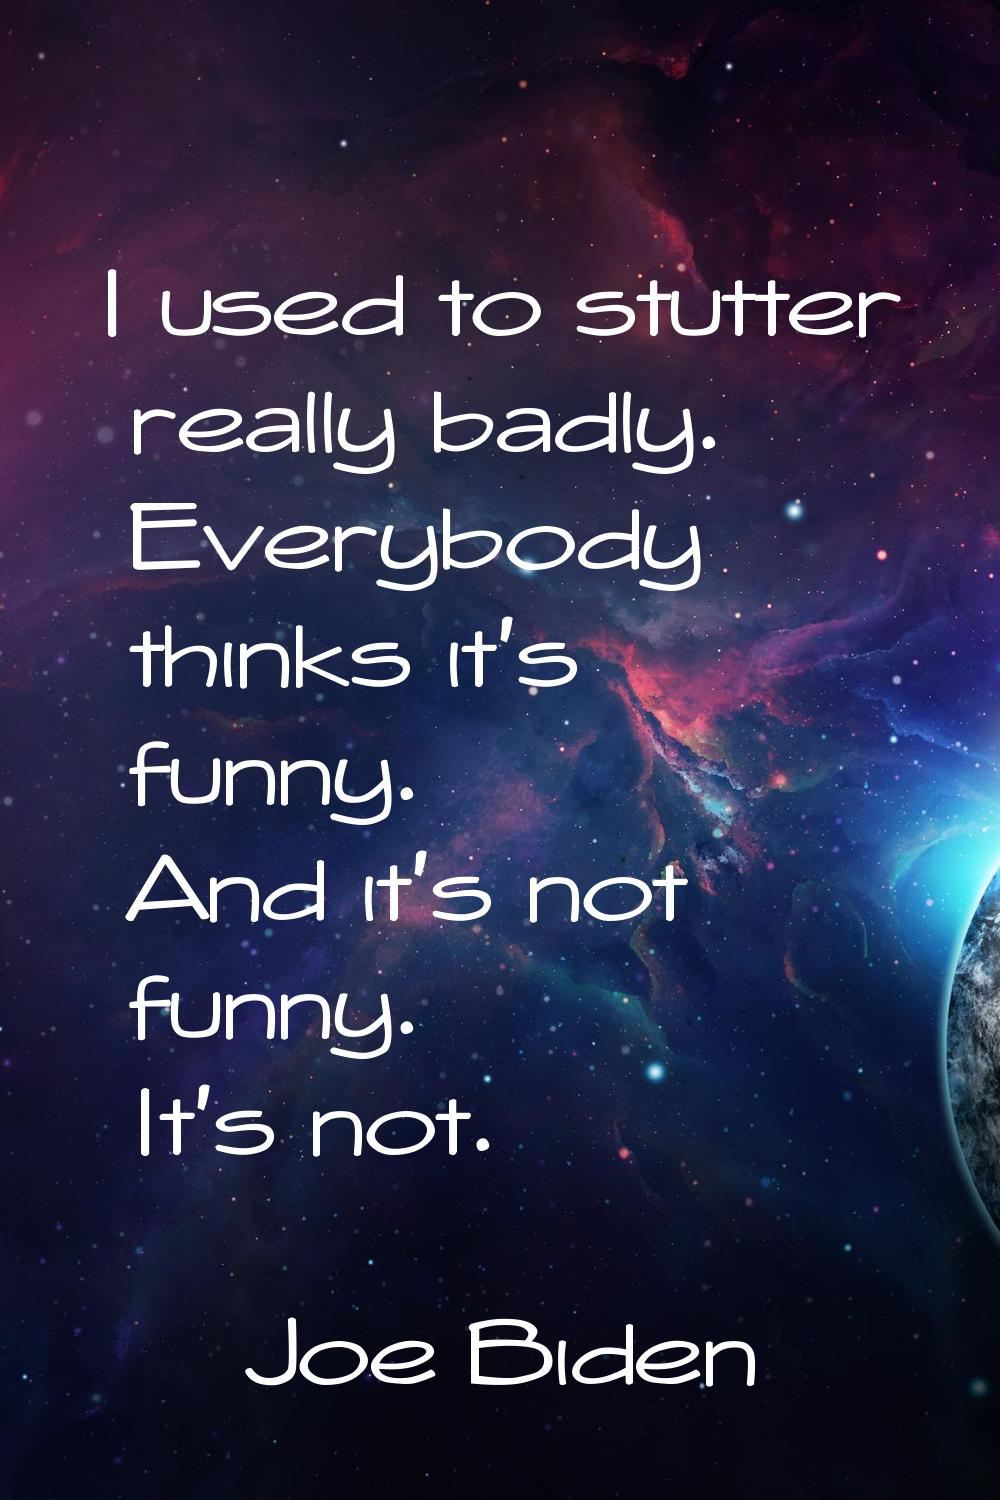 I used to stutter really badly. Everybody thinks it's funny. And it's not funny. It's not.